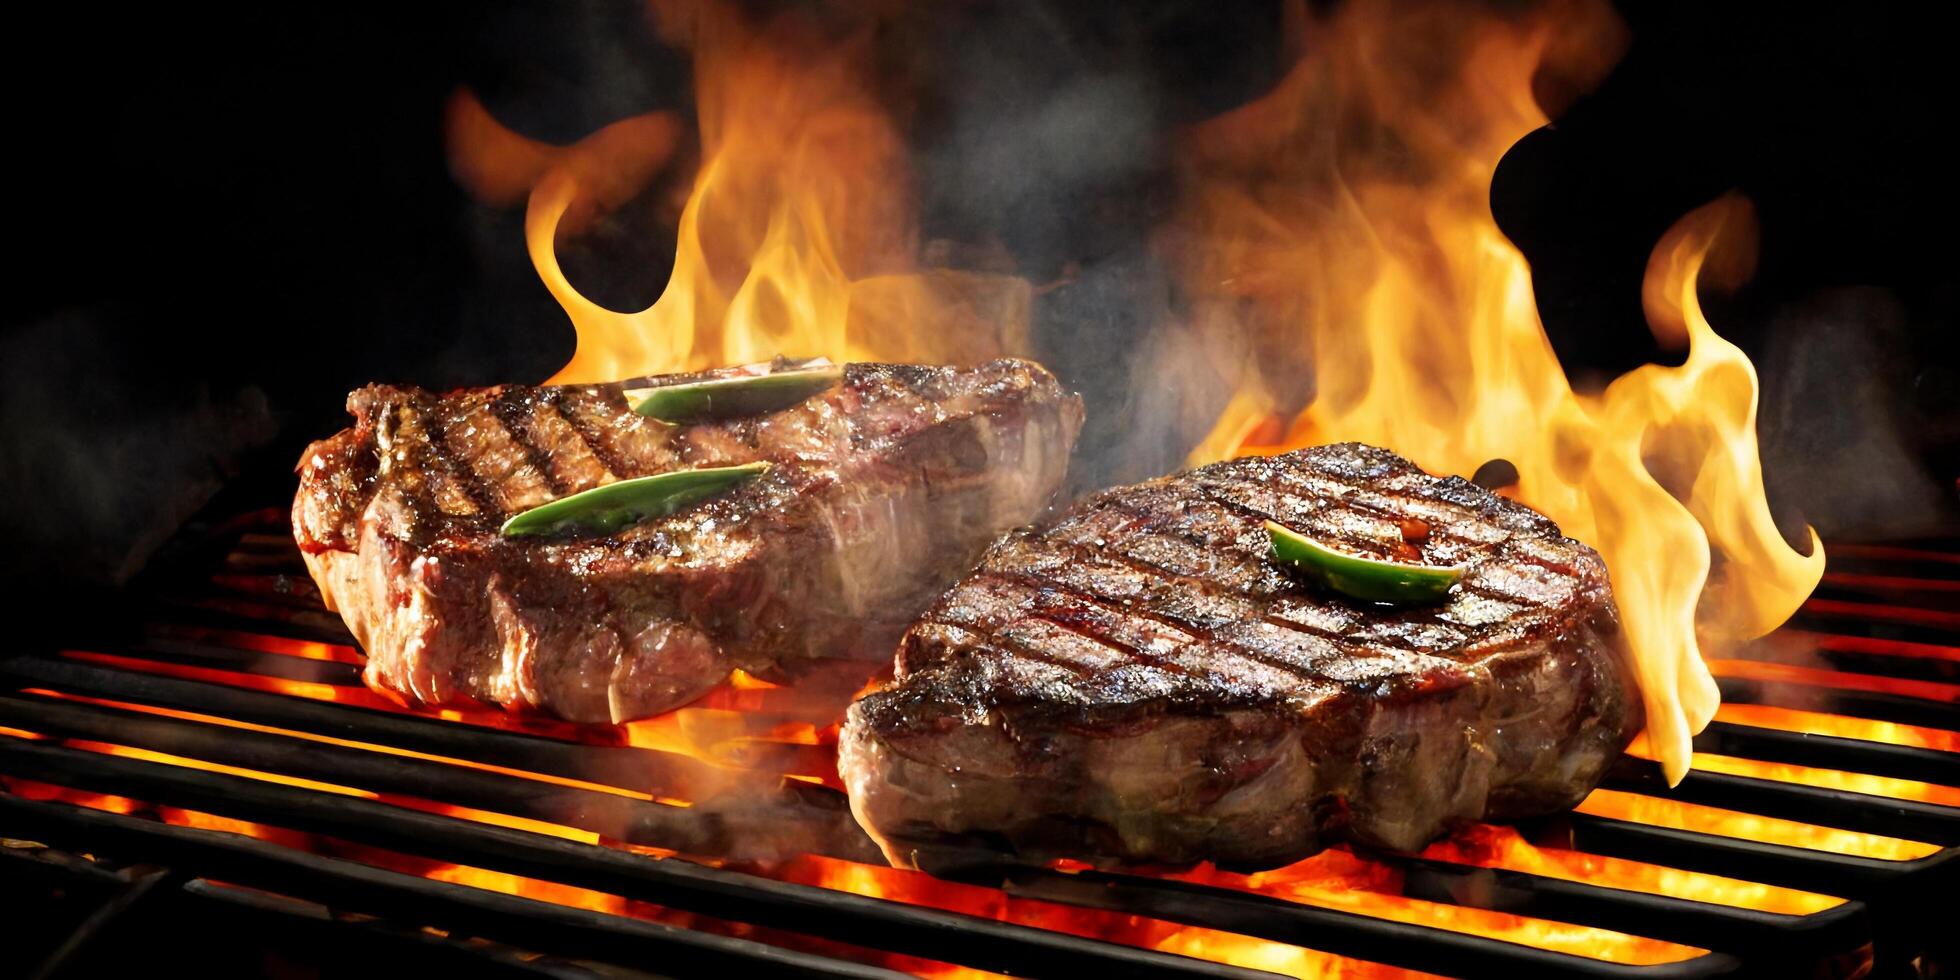 The grilled steak on the grill with frame and . photo